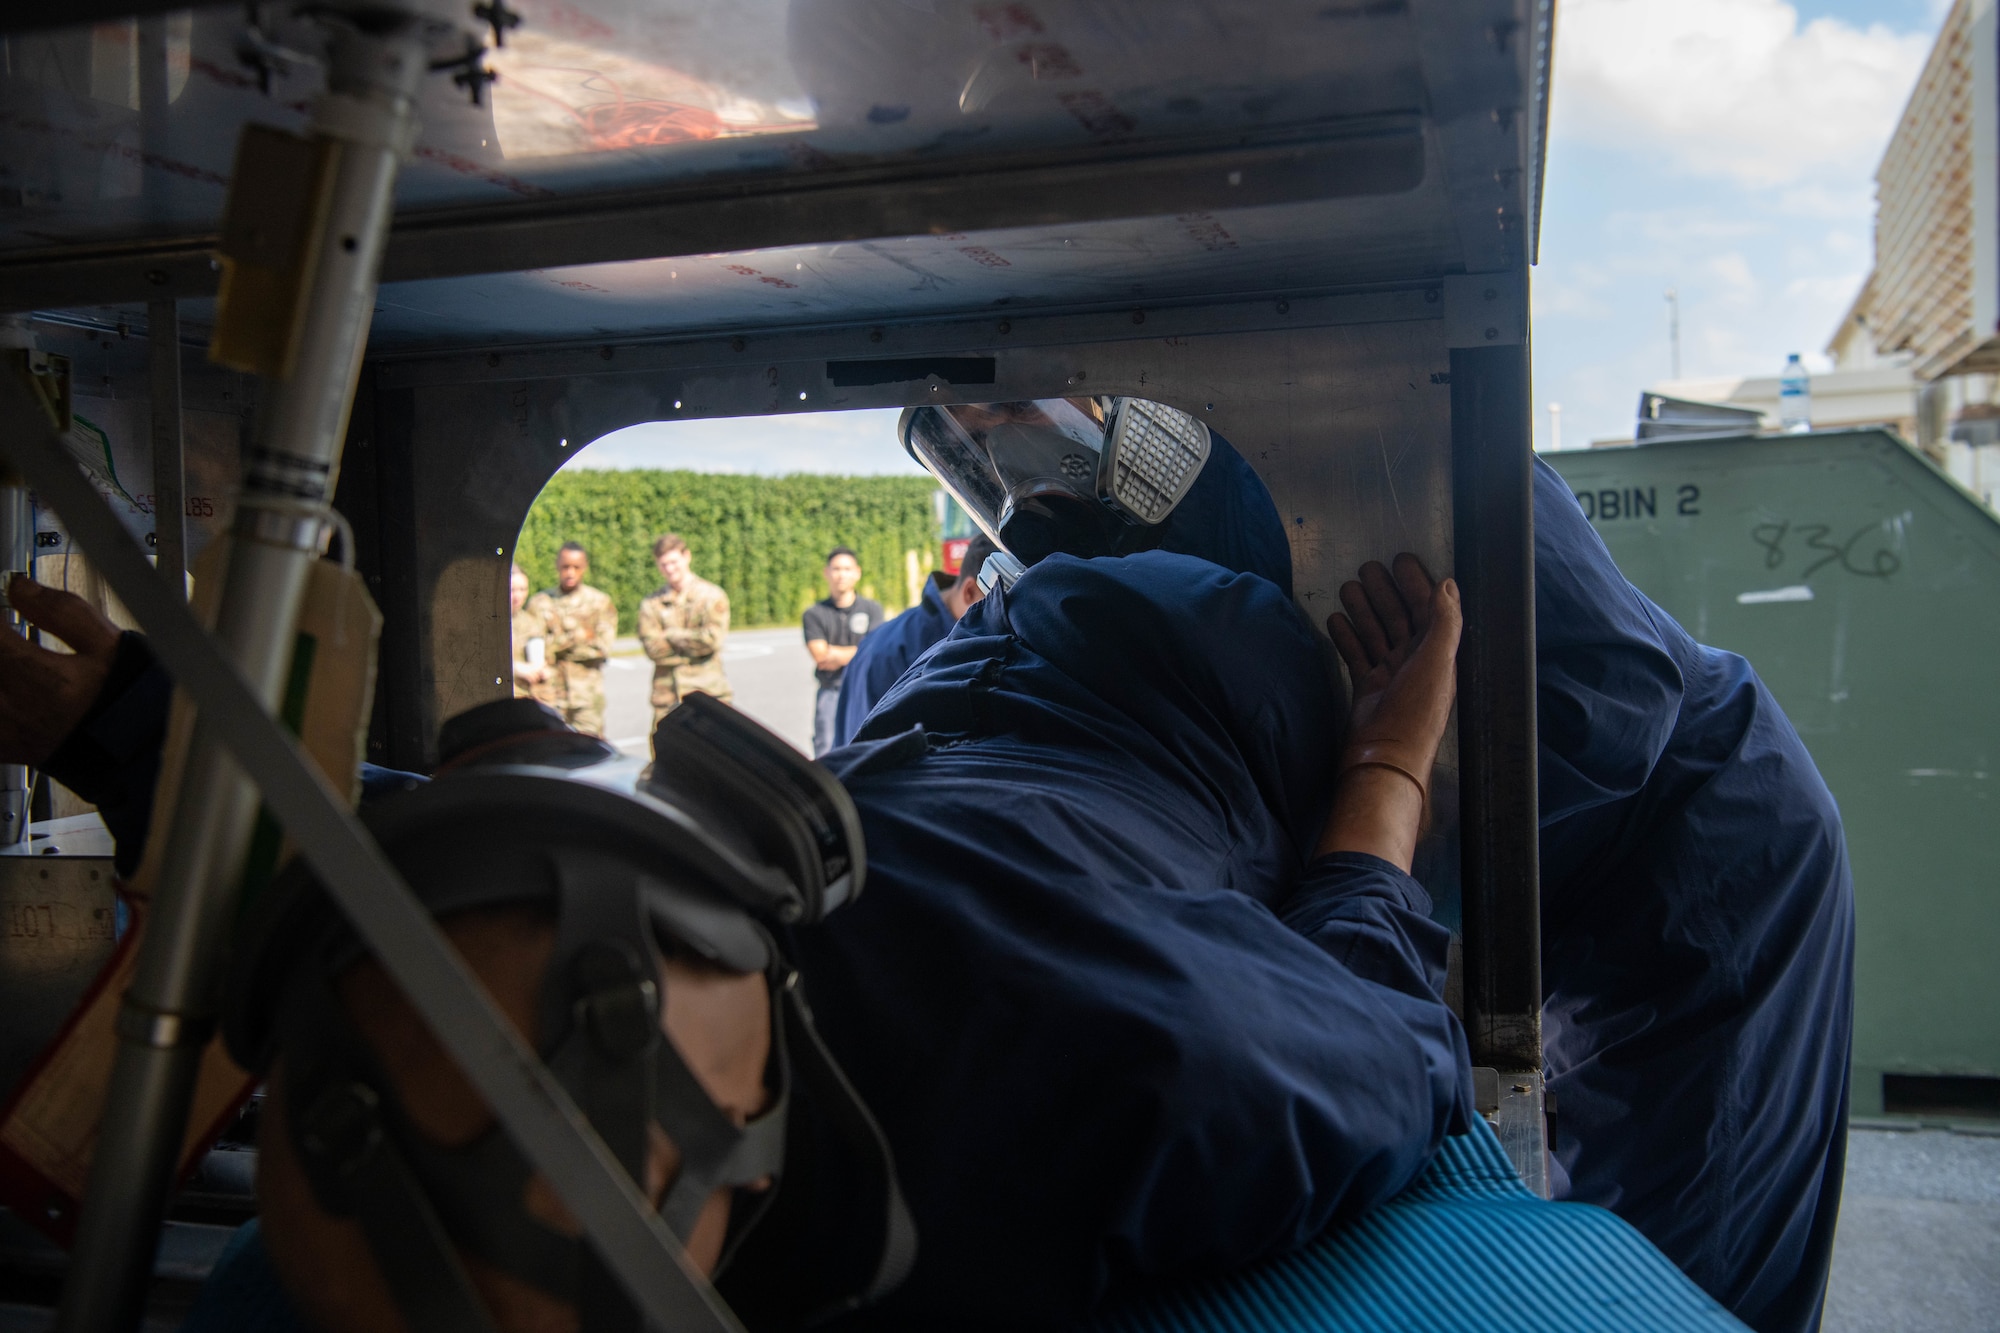 A mannequin lays in a confined space for a extraction demonstration